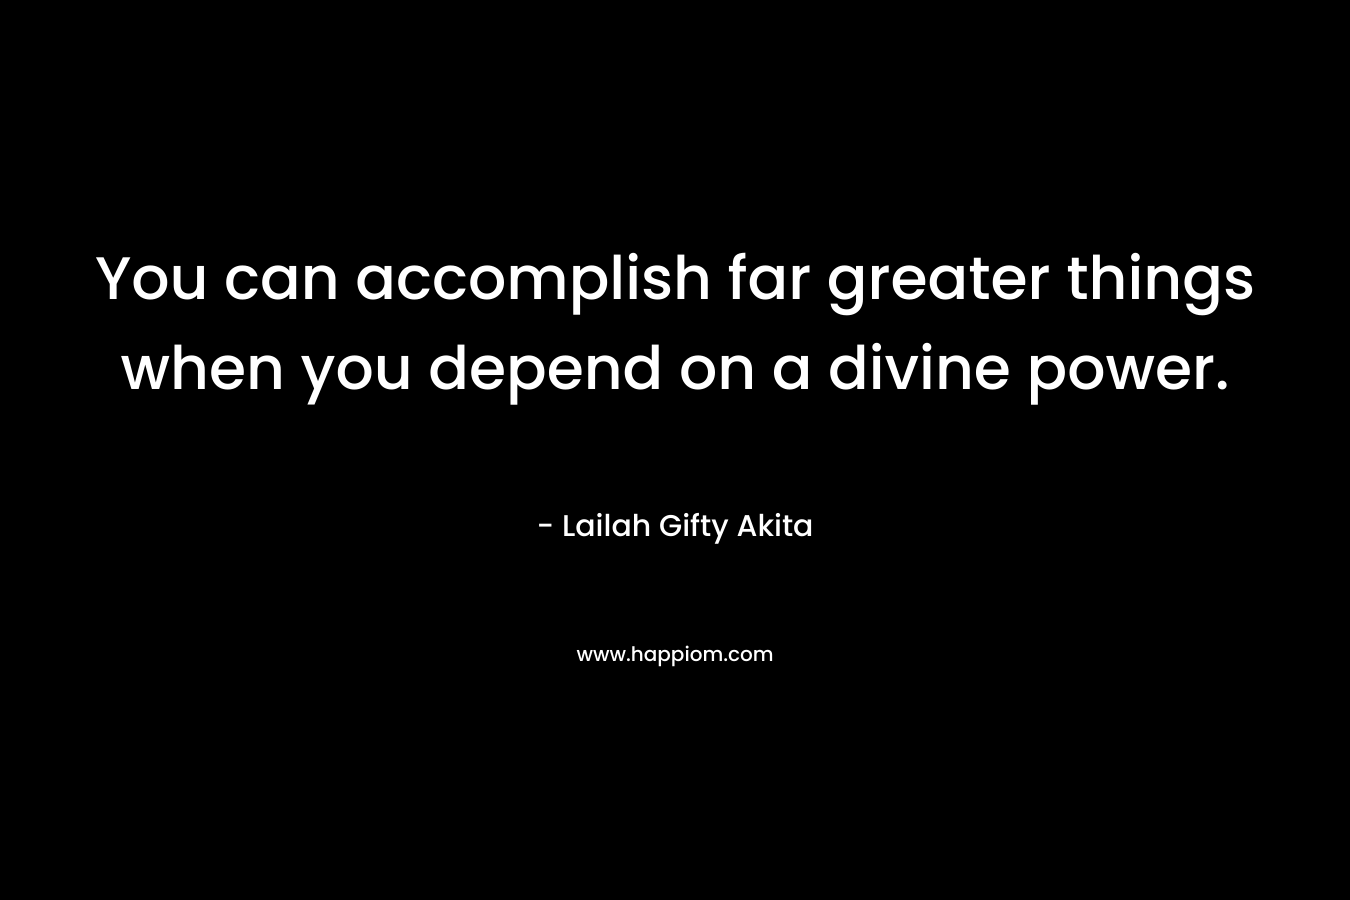 You can accomplish far greater things when you depend on a divine power.